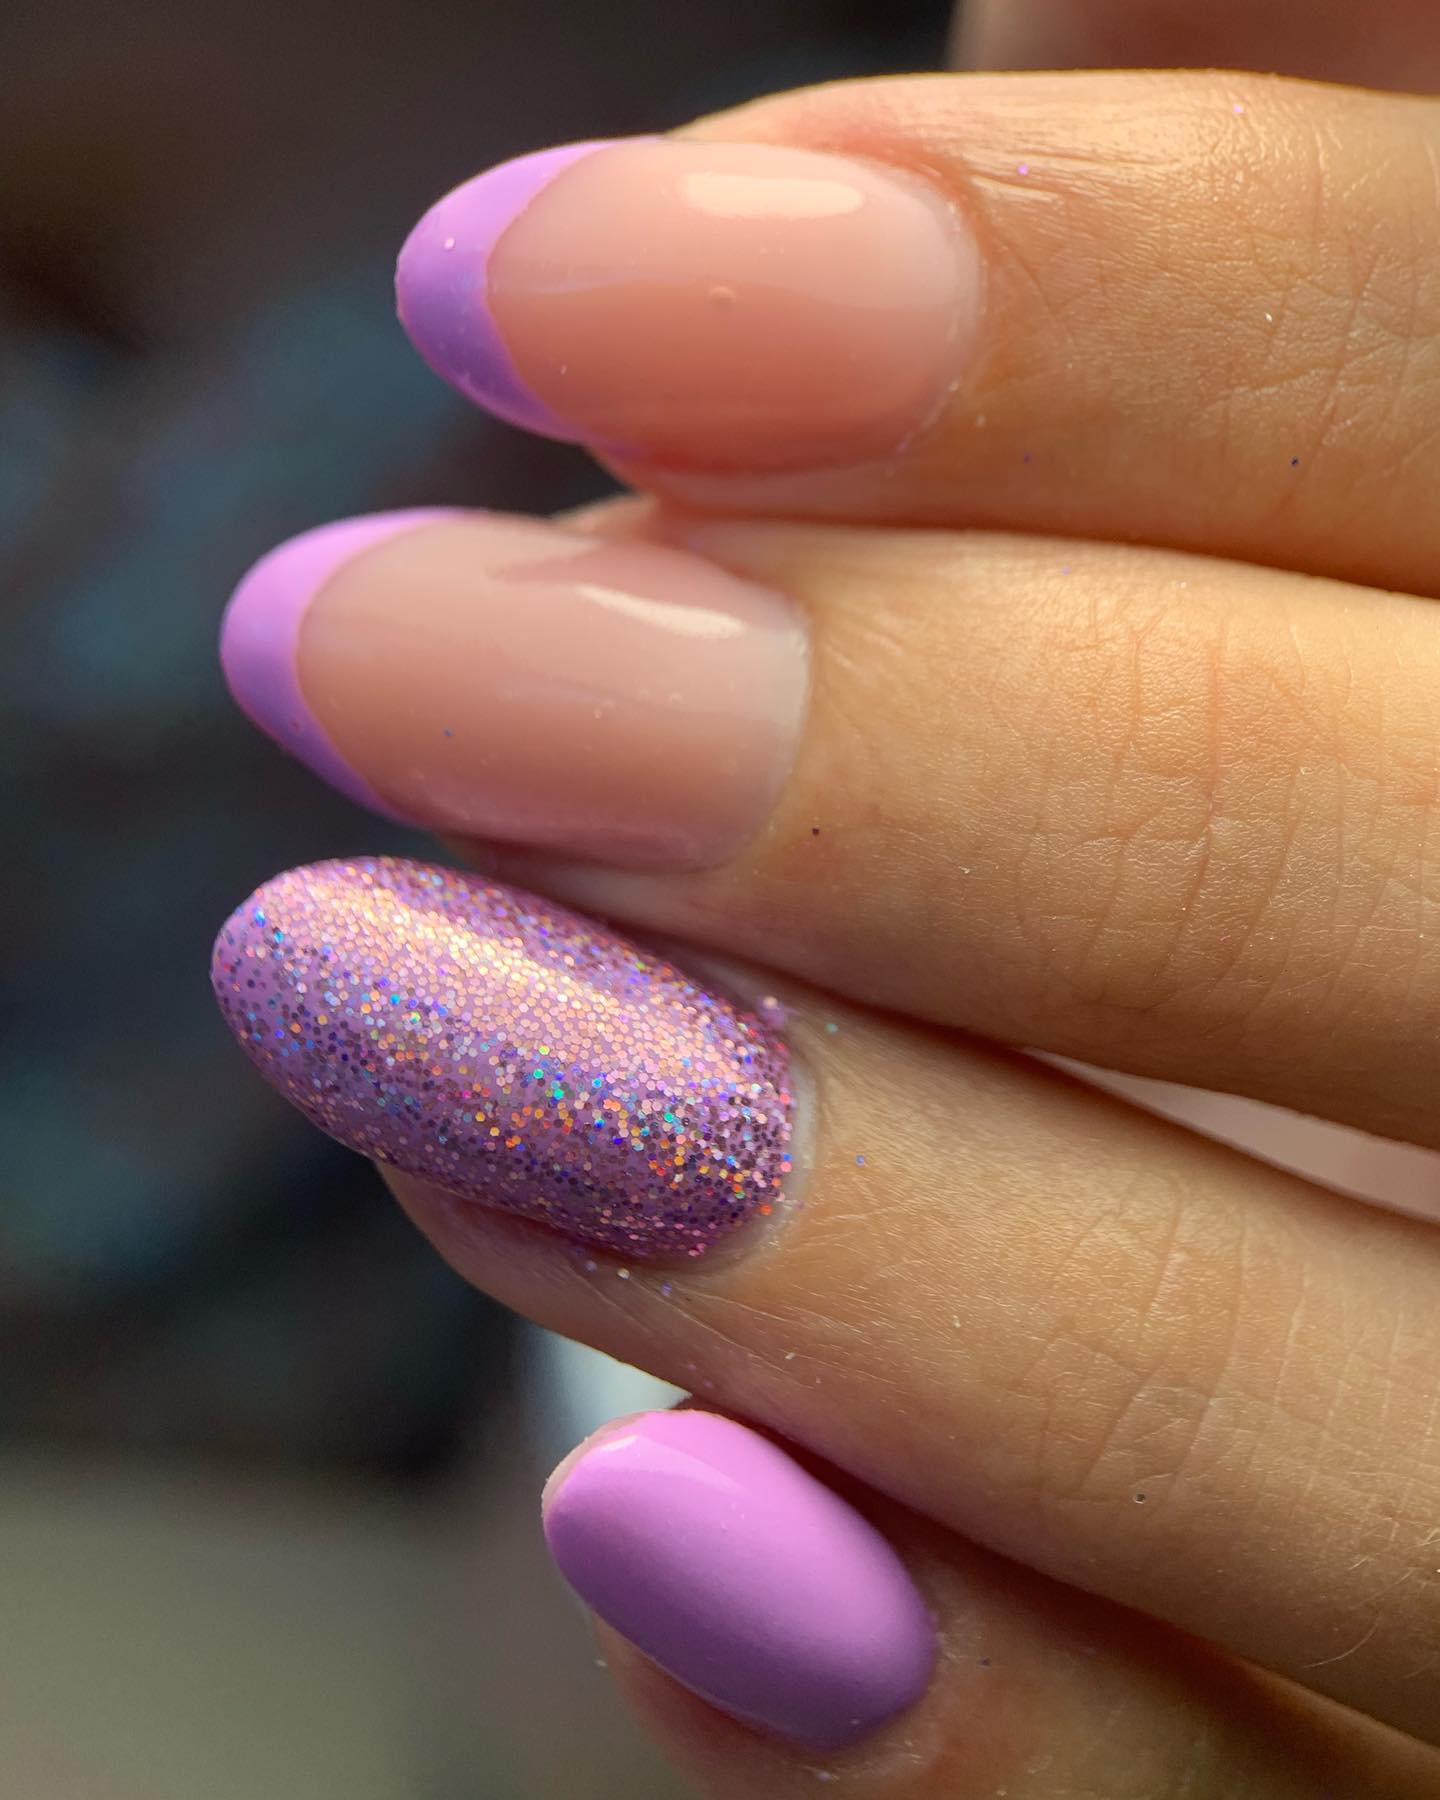 Add just a bit of glitter to your French manicure to spice it up. This design will suit women looking for a formal design.